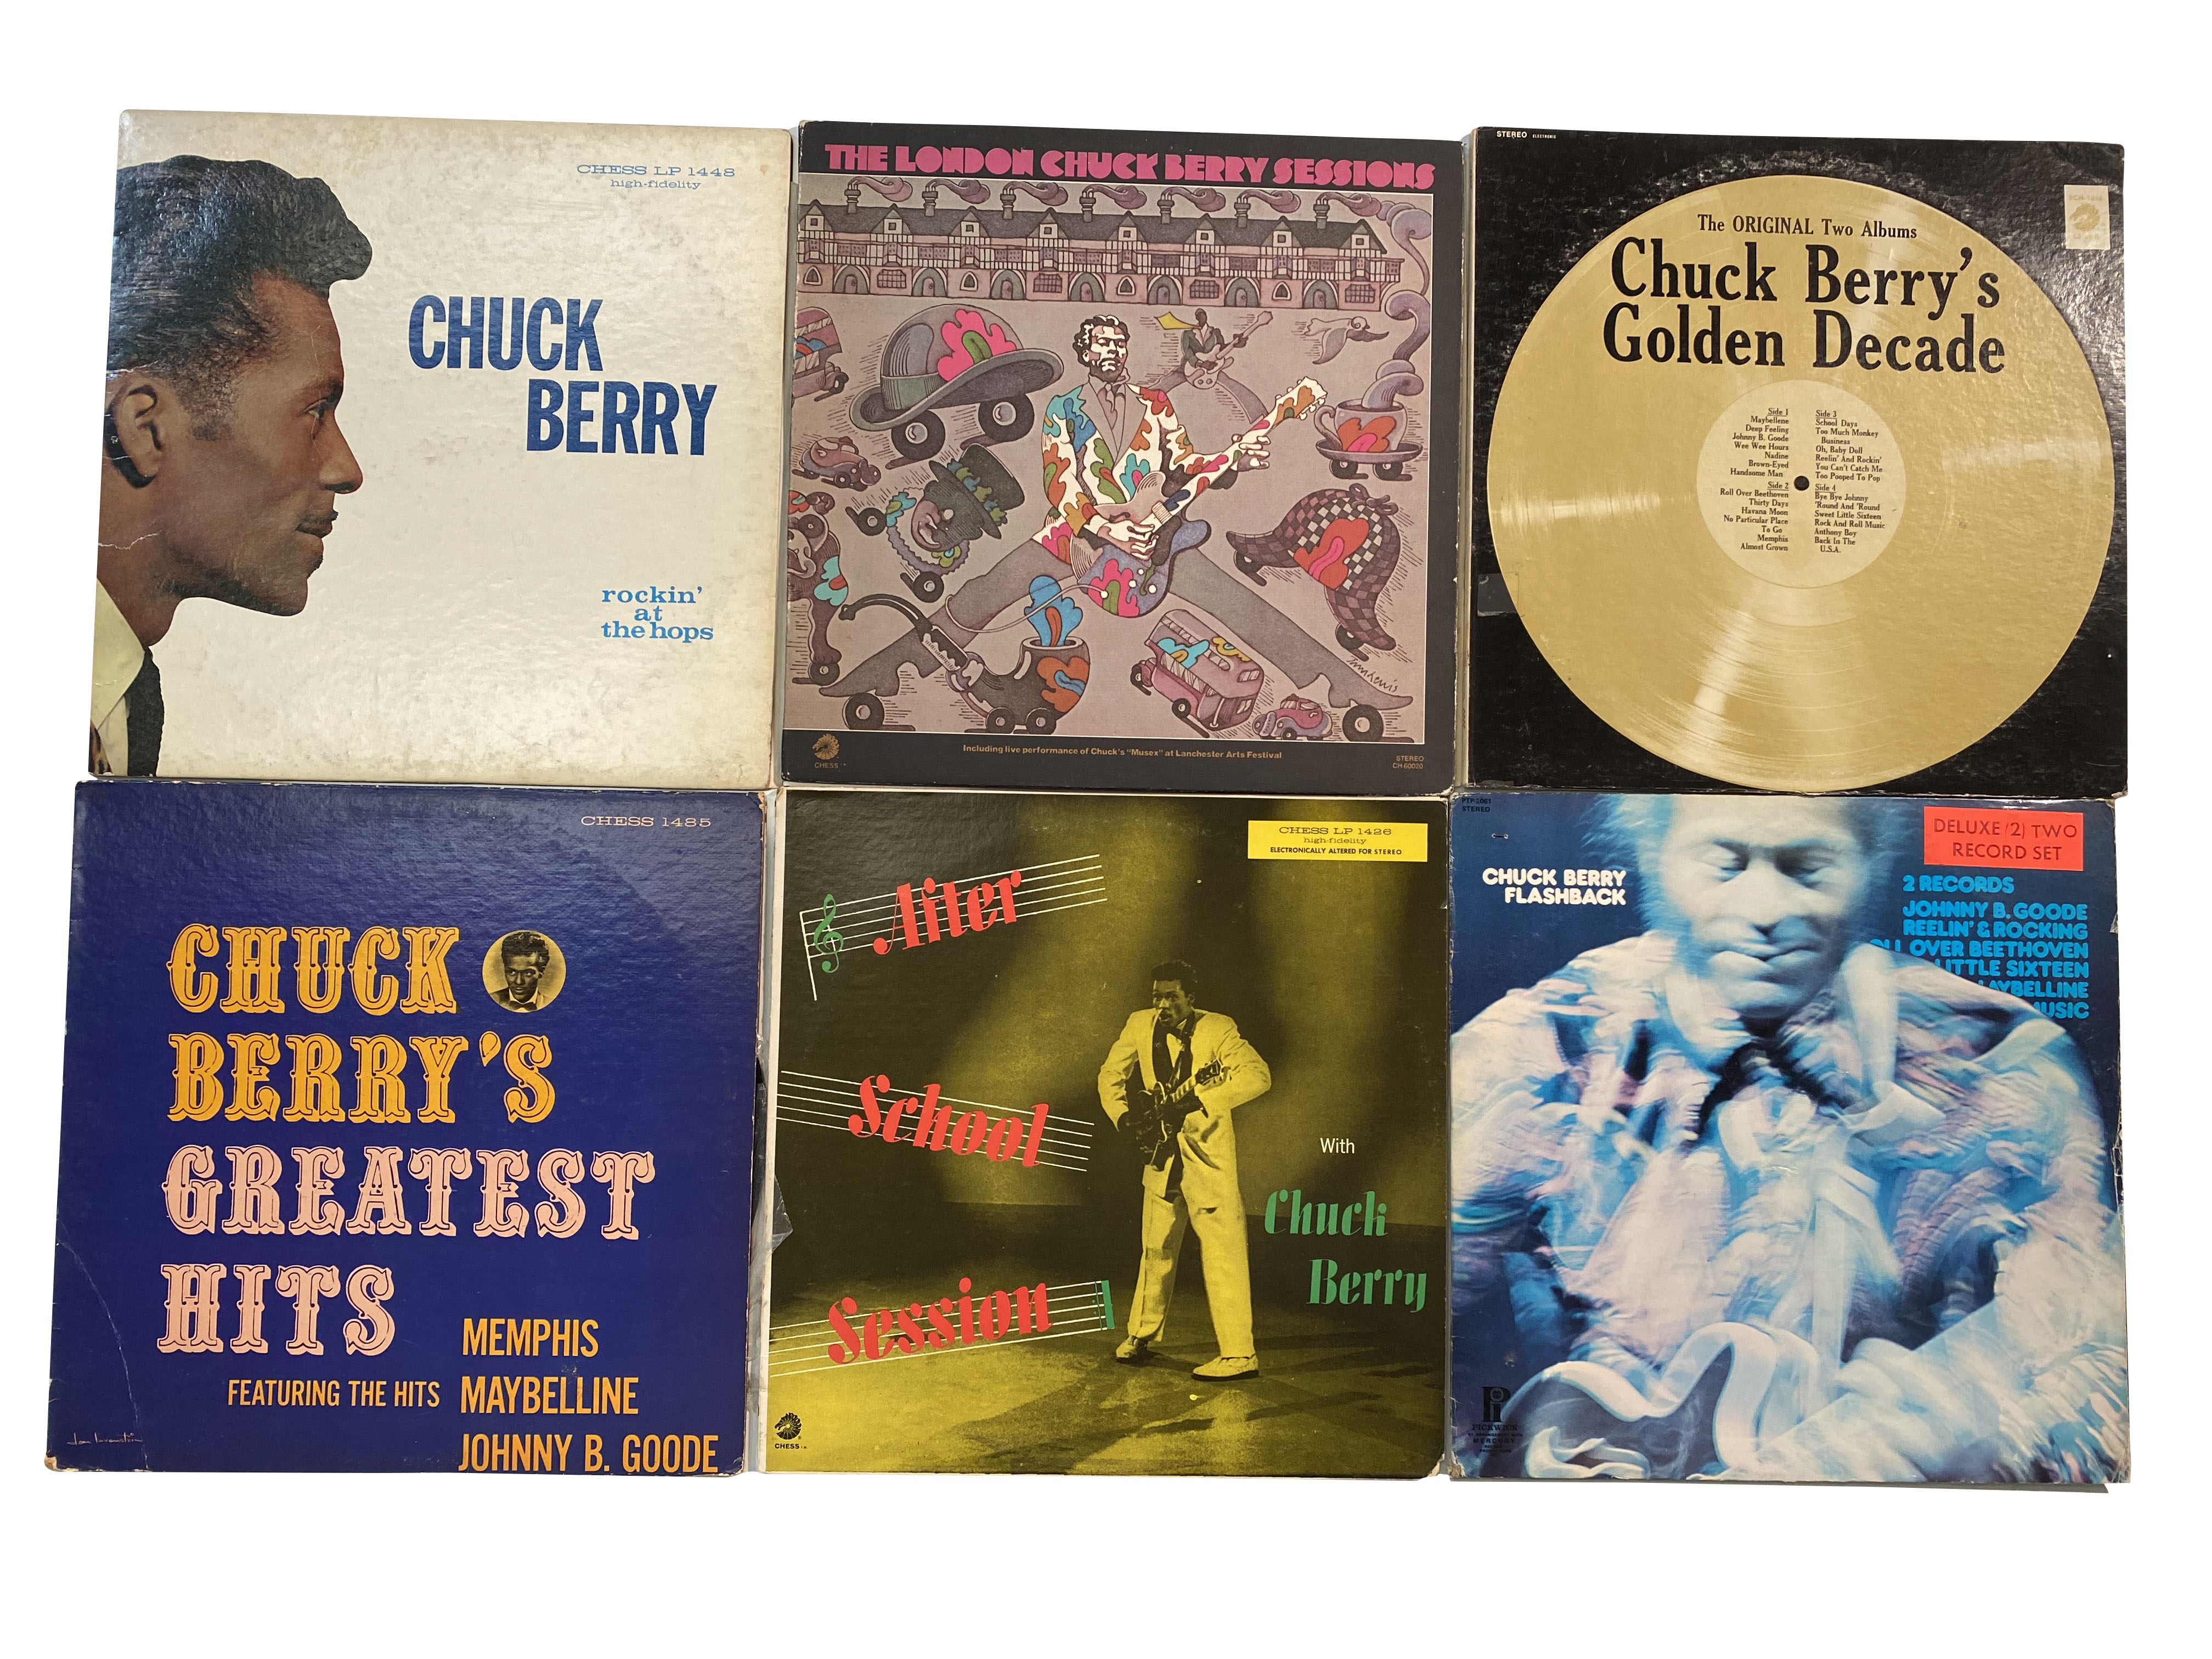 CHUCK BERRY US AND EU LPS.